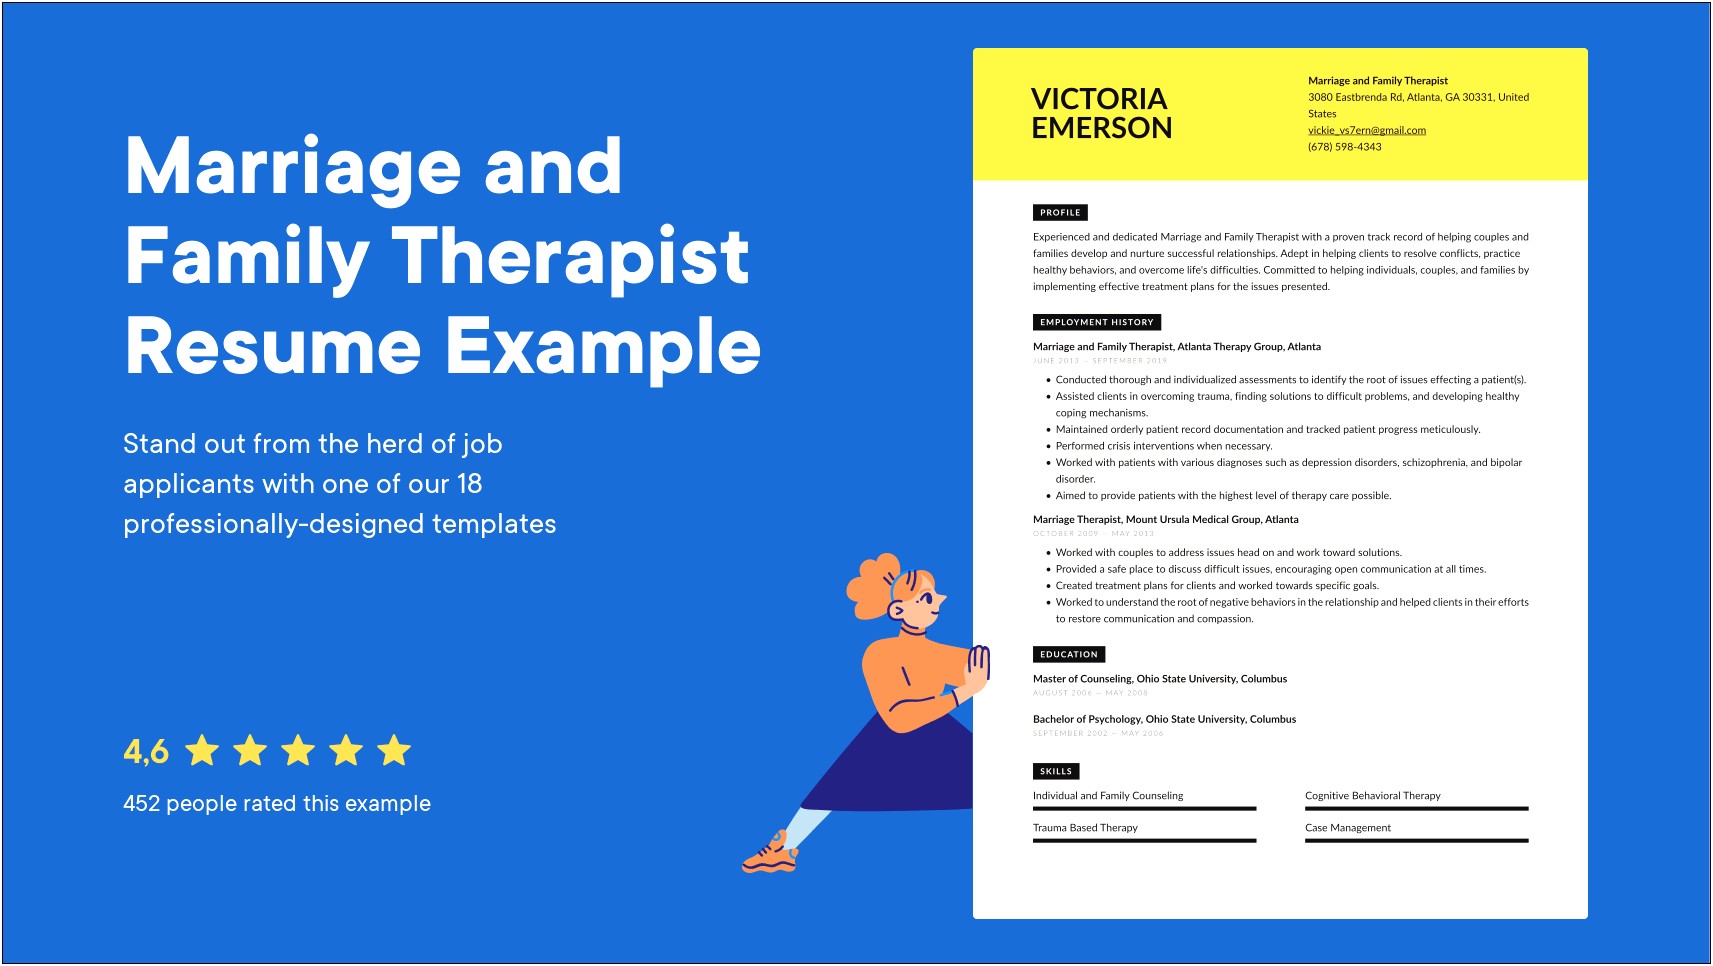 Sample Resumes For Marriage And Family Therapist